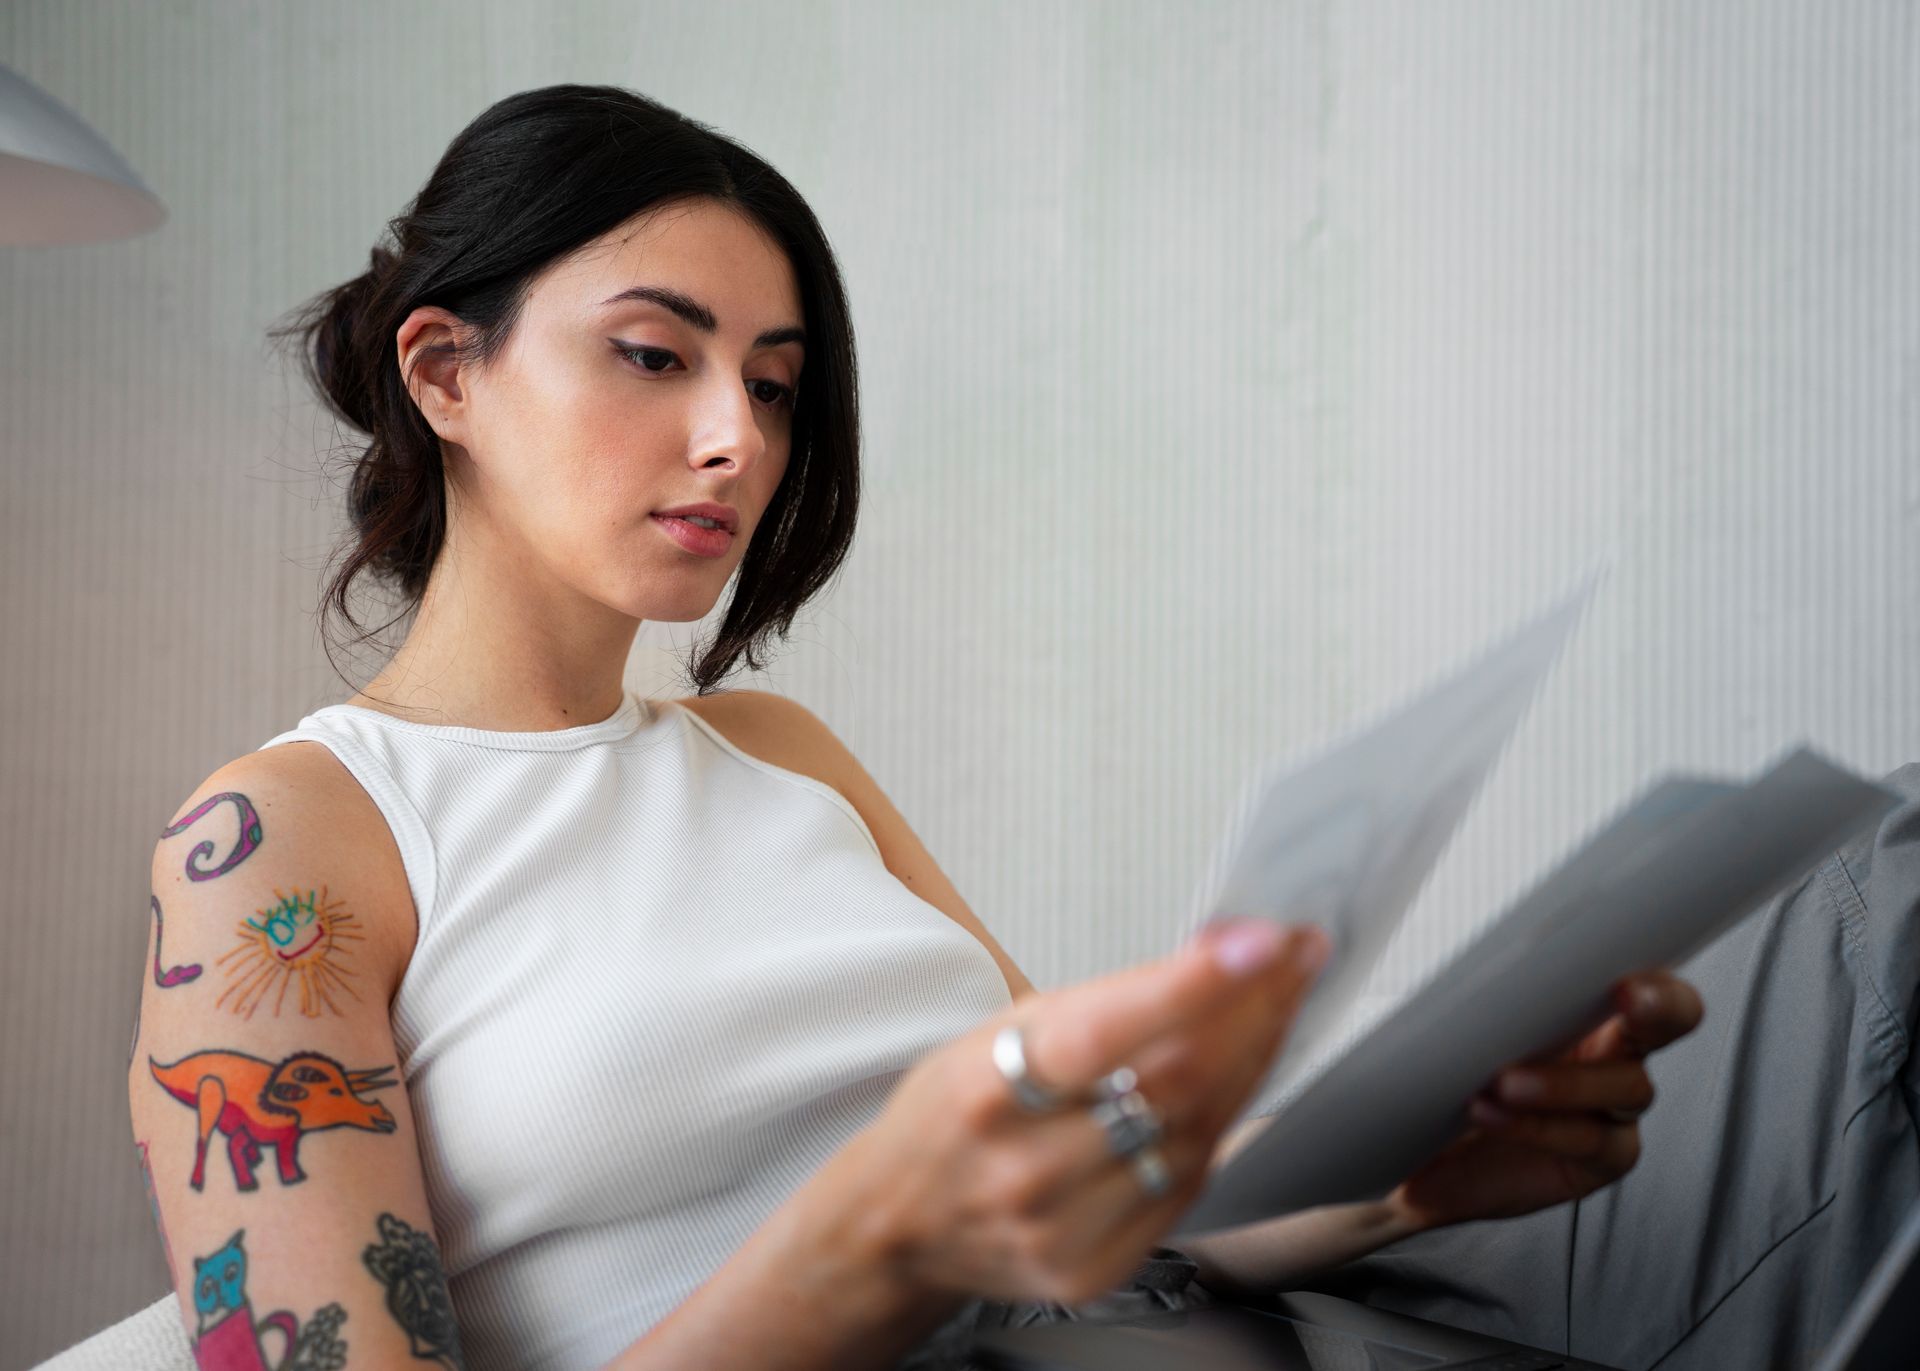 a woman with tattoos on her arms is sitting on a couch reading a piece of paper .